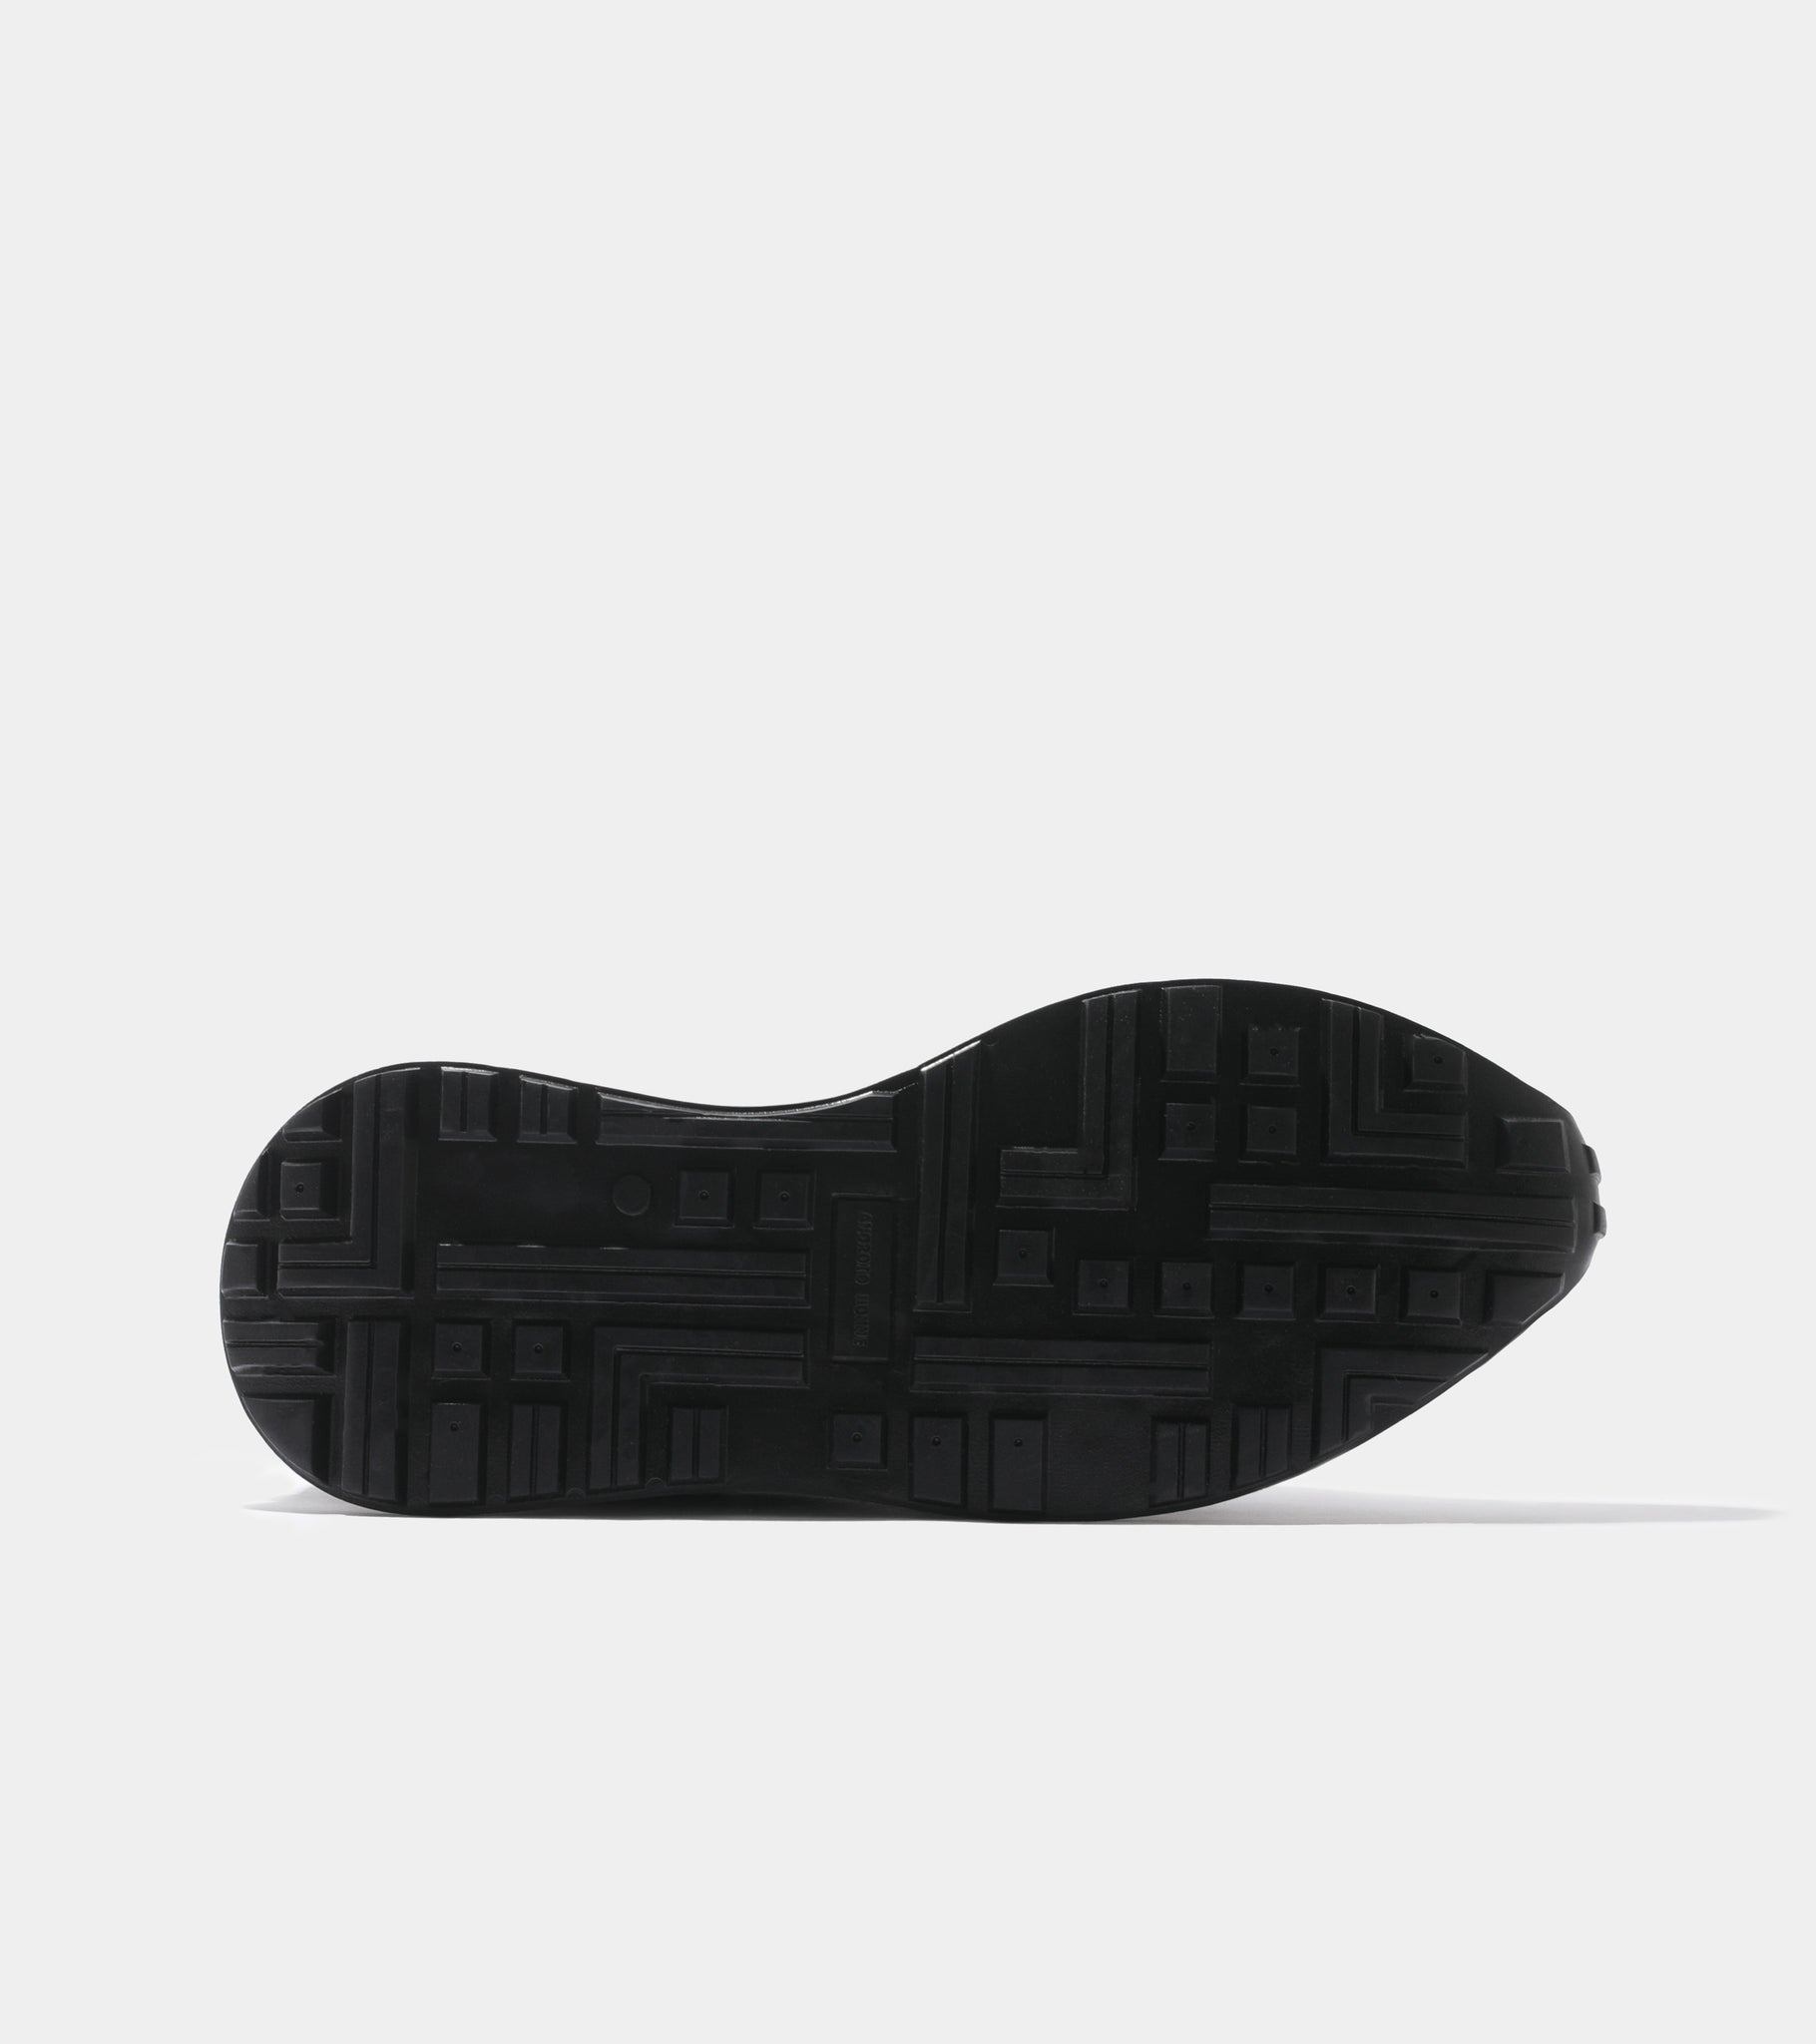 Ecom imagery of the Marina Del Rey Grey Nylon Black Suede Android Homme Trainers sole.